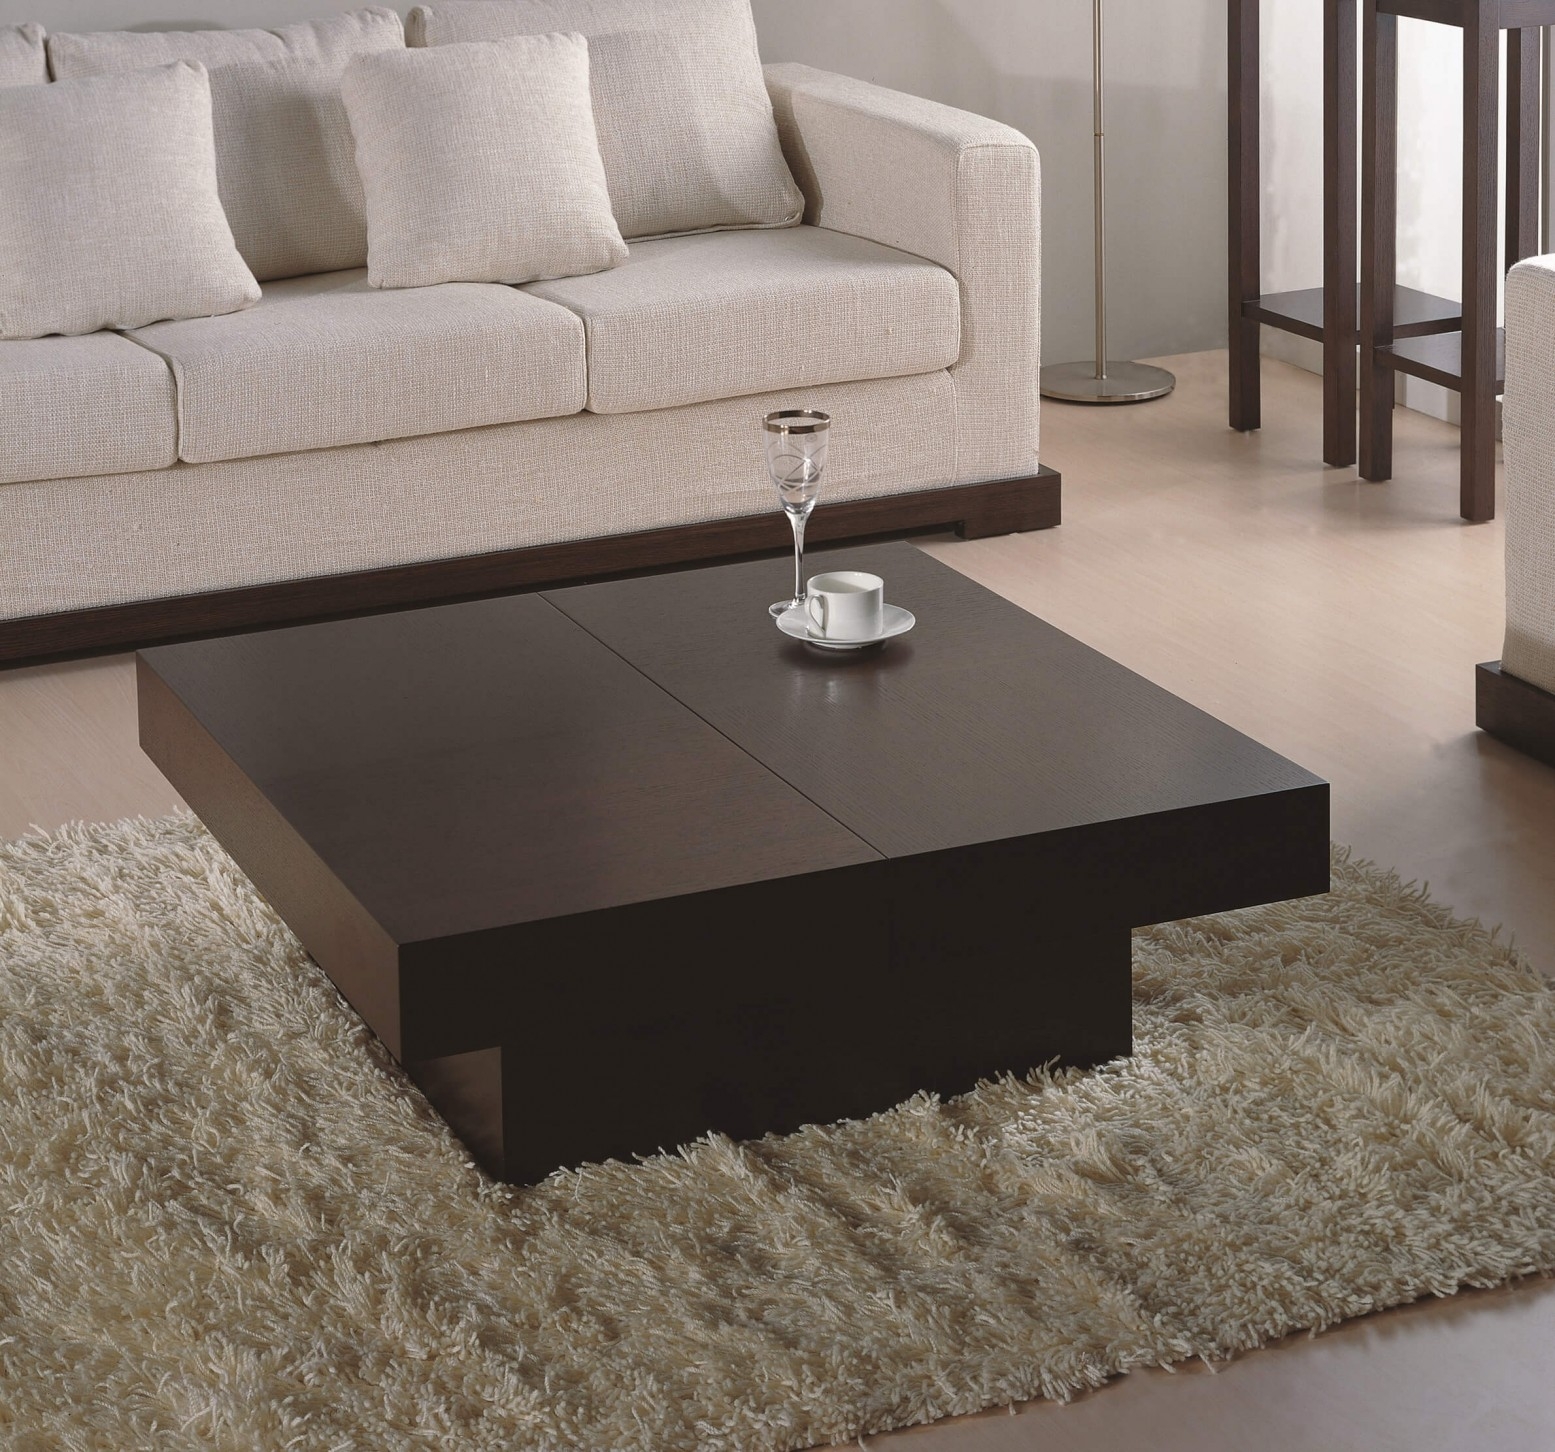 Modern Square Coffee Tables - Pin By Minimize Organize Enjoy Prof On When I Move Out Tea Table Design Modern Square Coffee Table Coffee Table Furniture : If you love coffee table in square shape, we also have a list for you.